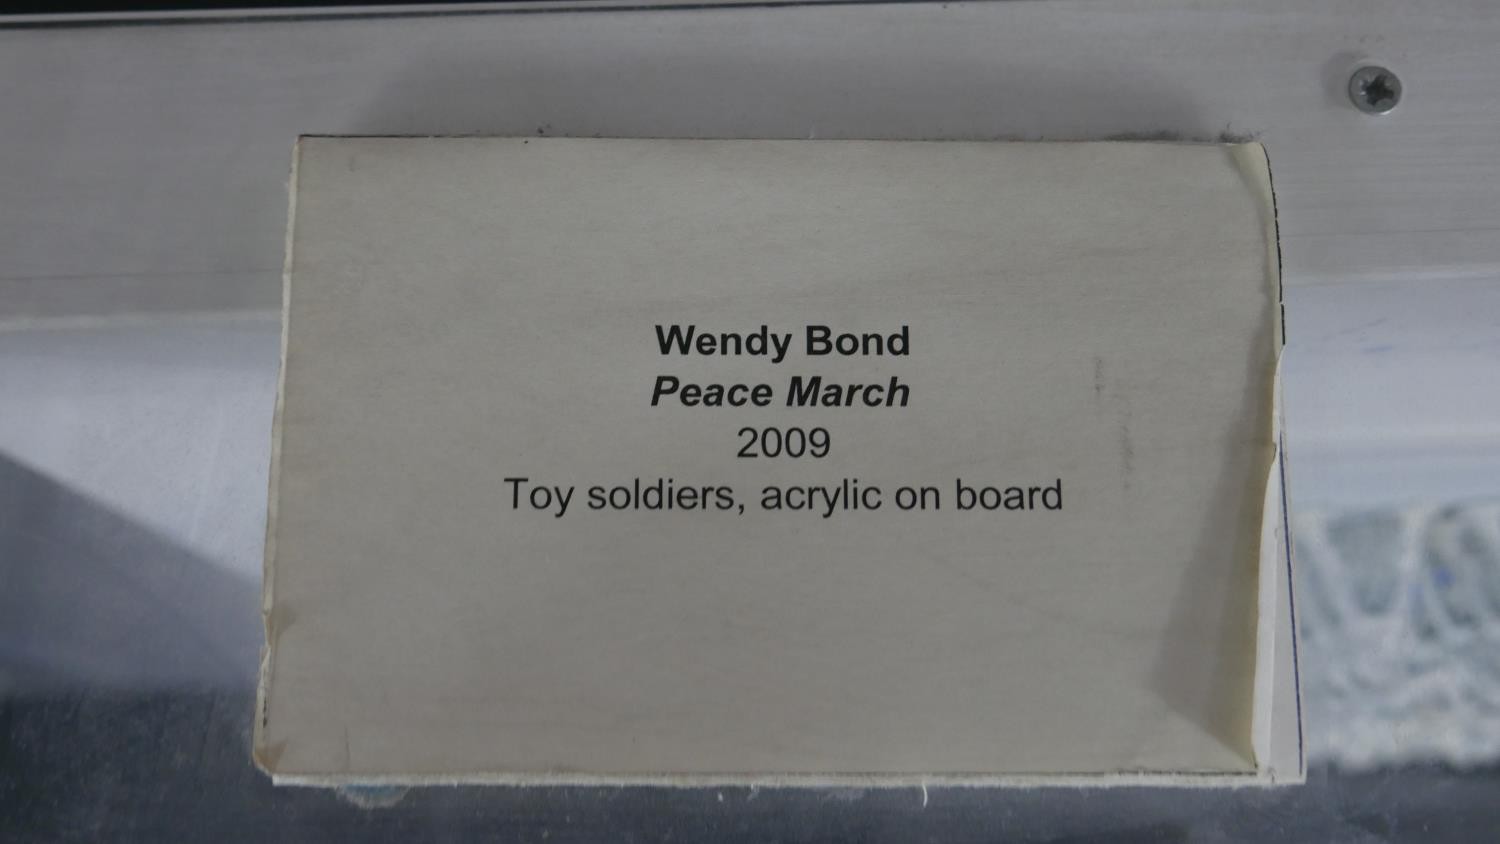 Wendy Bond, 'Peace March', toy soldiers, acrylic on board, signed, dated 2009, label verso. H.56 W. - Image 4 of 10